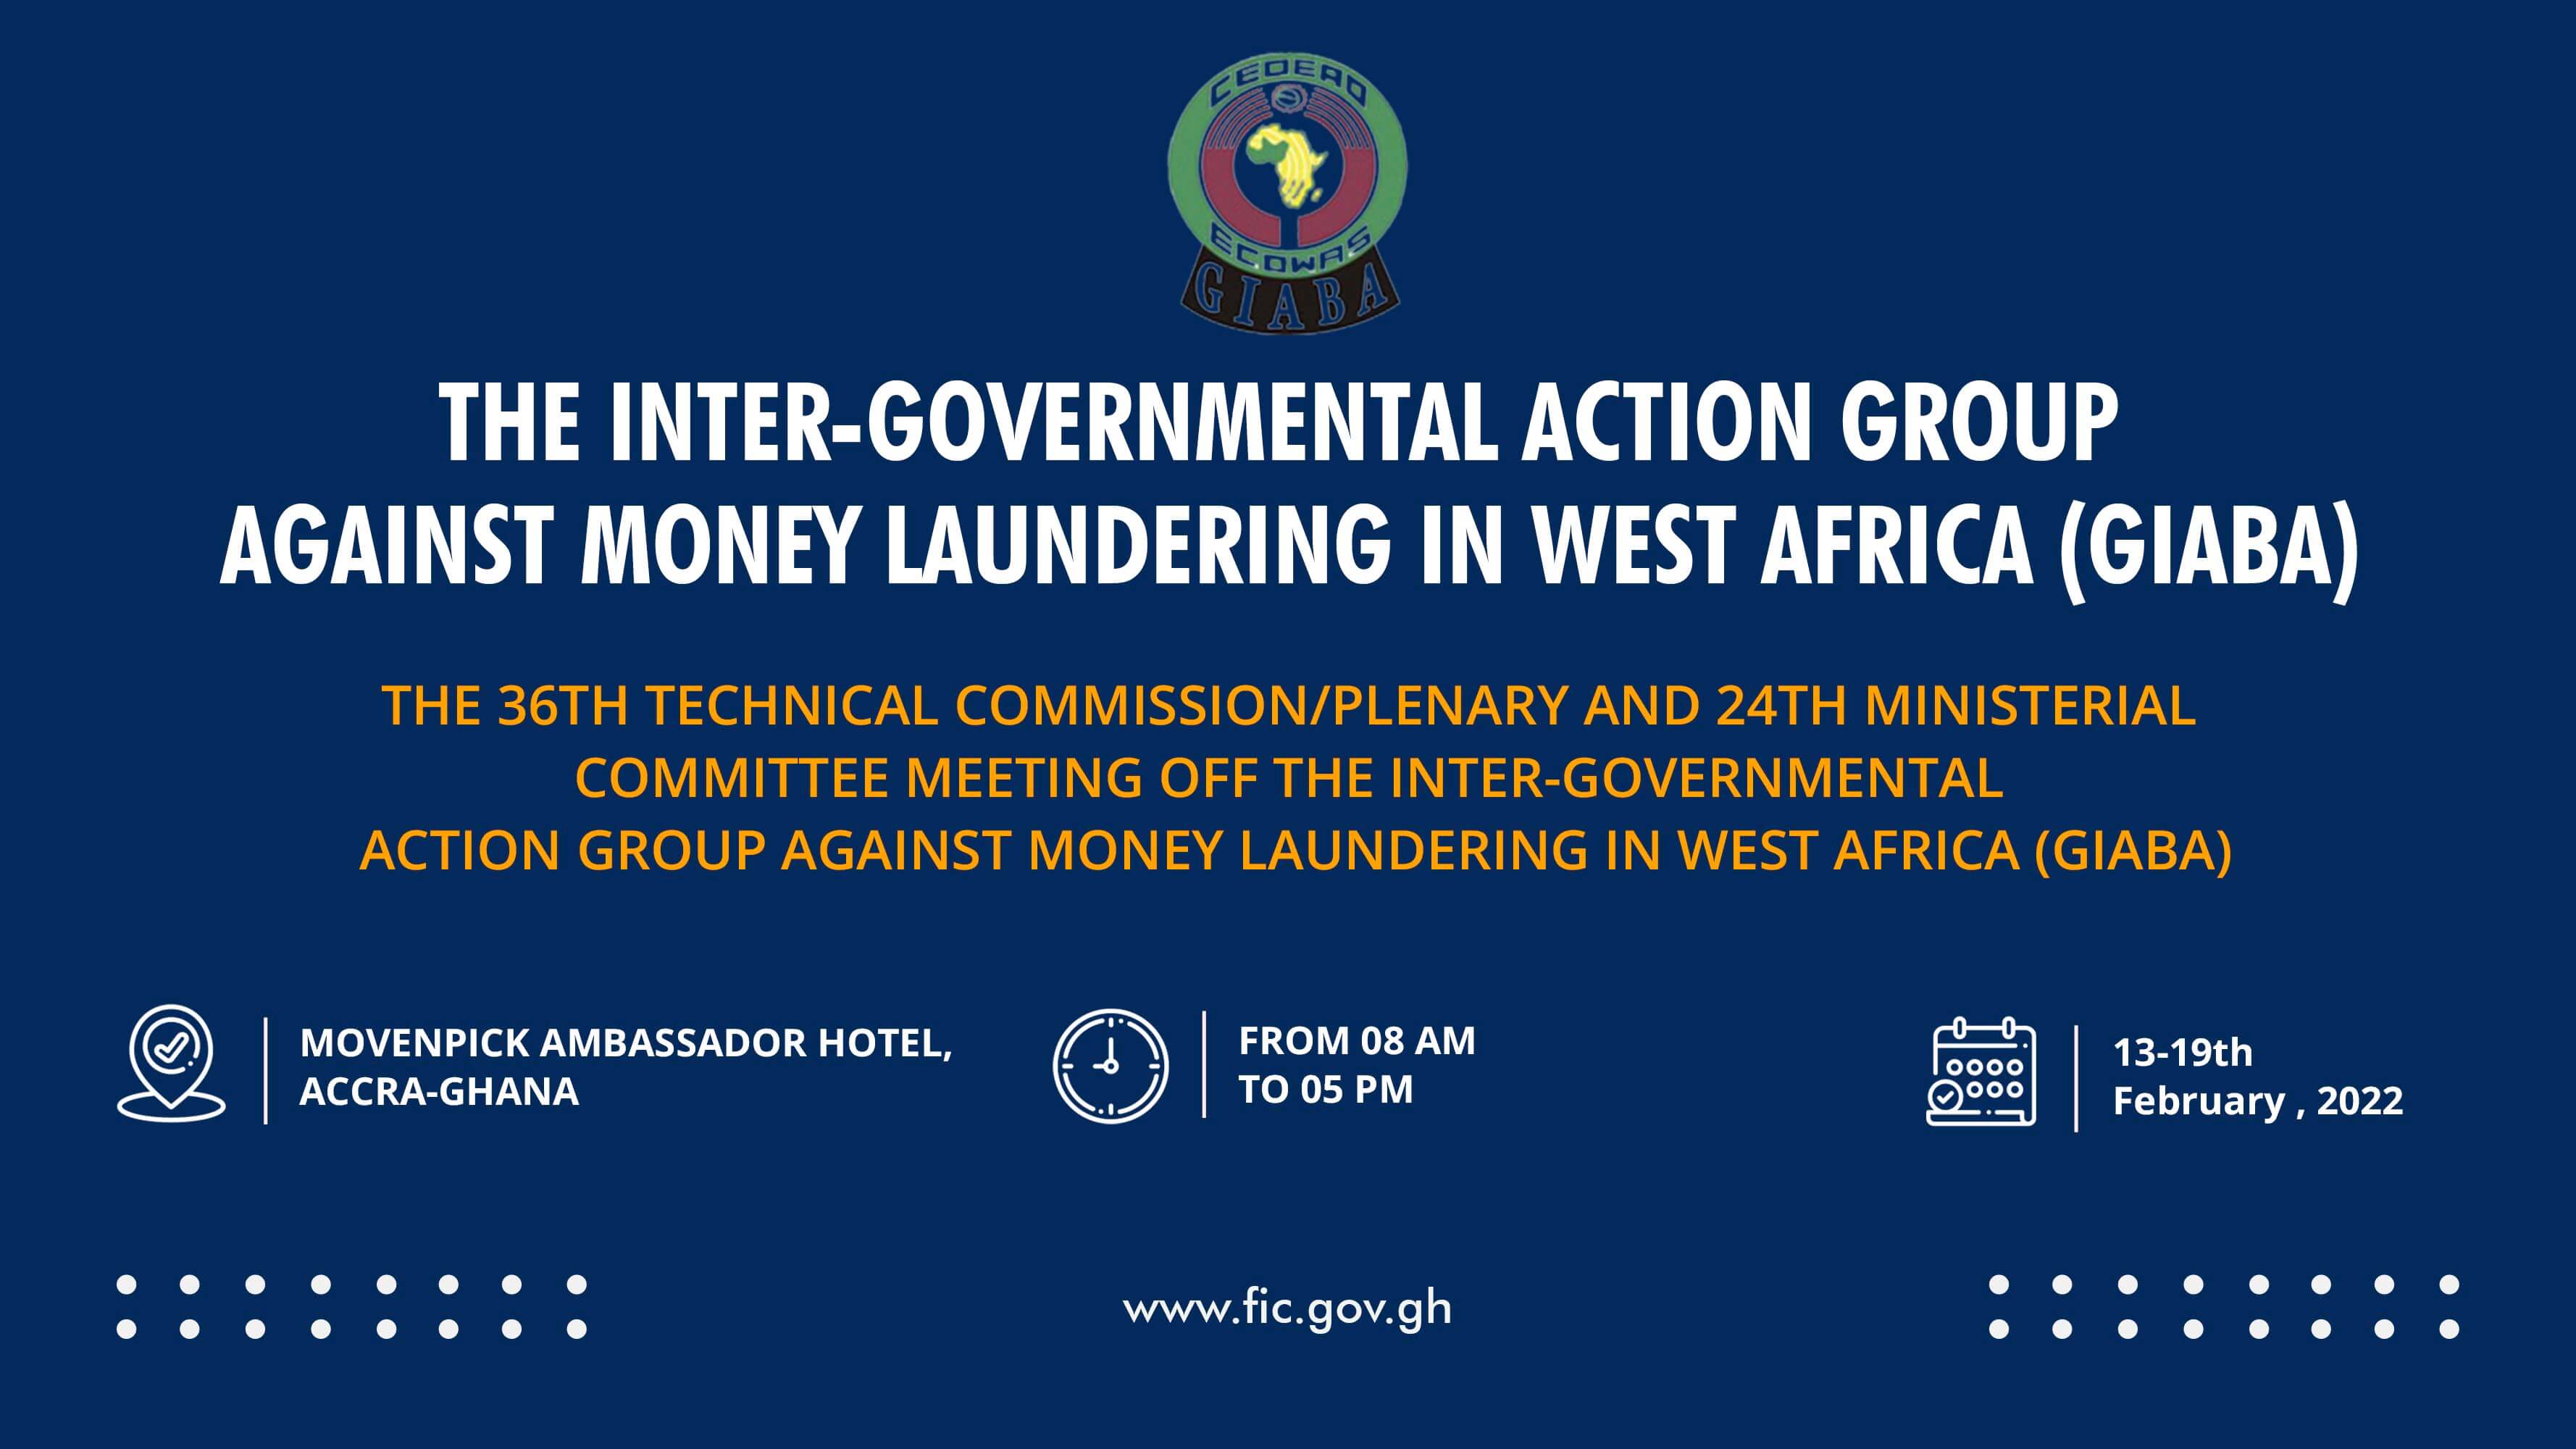 The 36th Technical Commission/Plenary and 24th Ministerial Committee Meeting off the Inter-Governmental Action Group against Money Laundering in West Africa (GIABA)